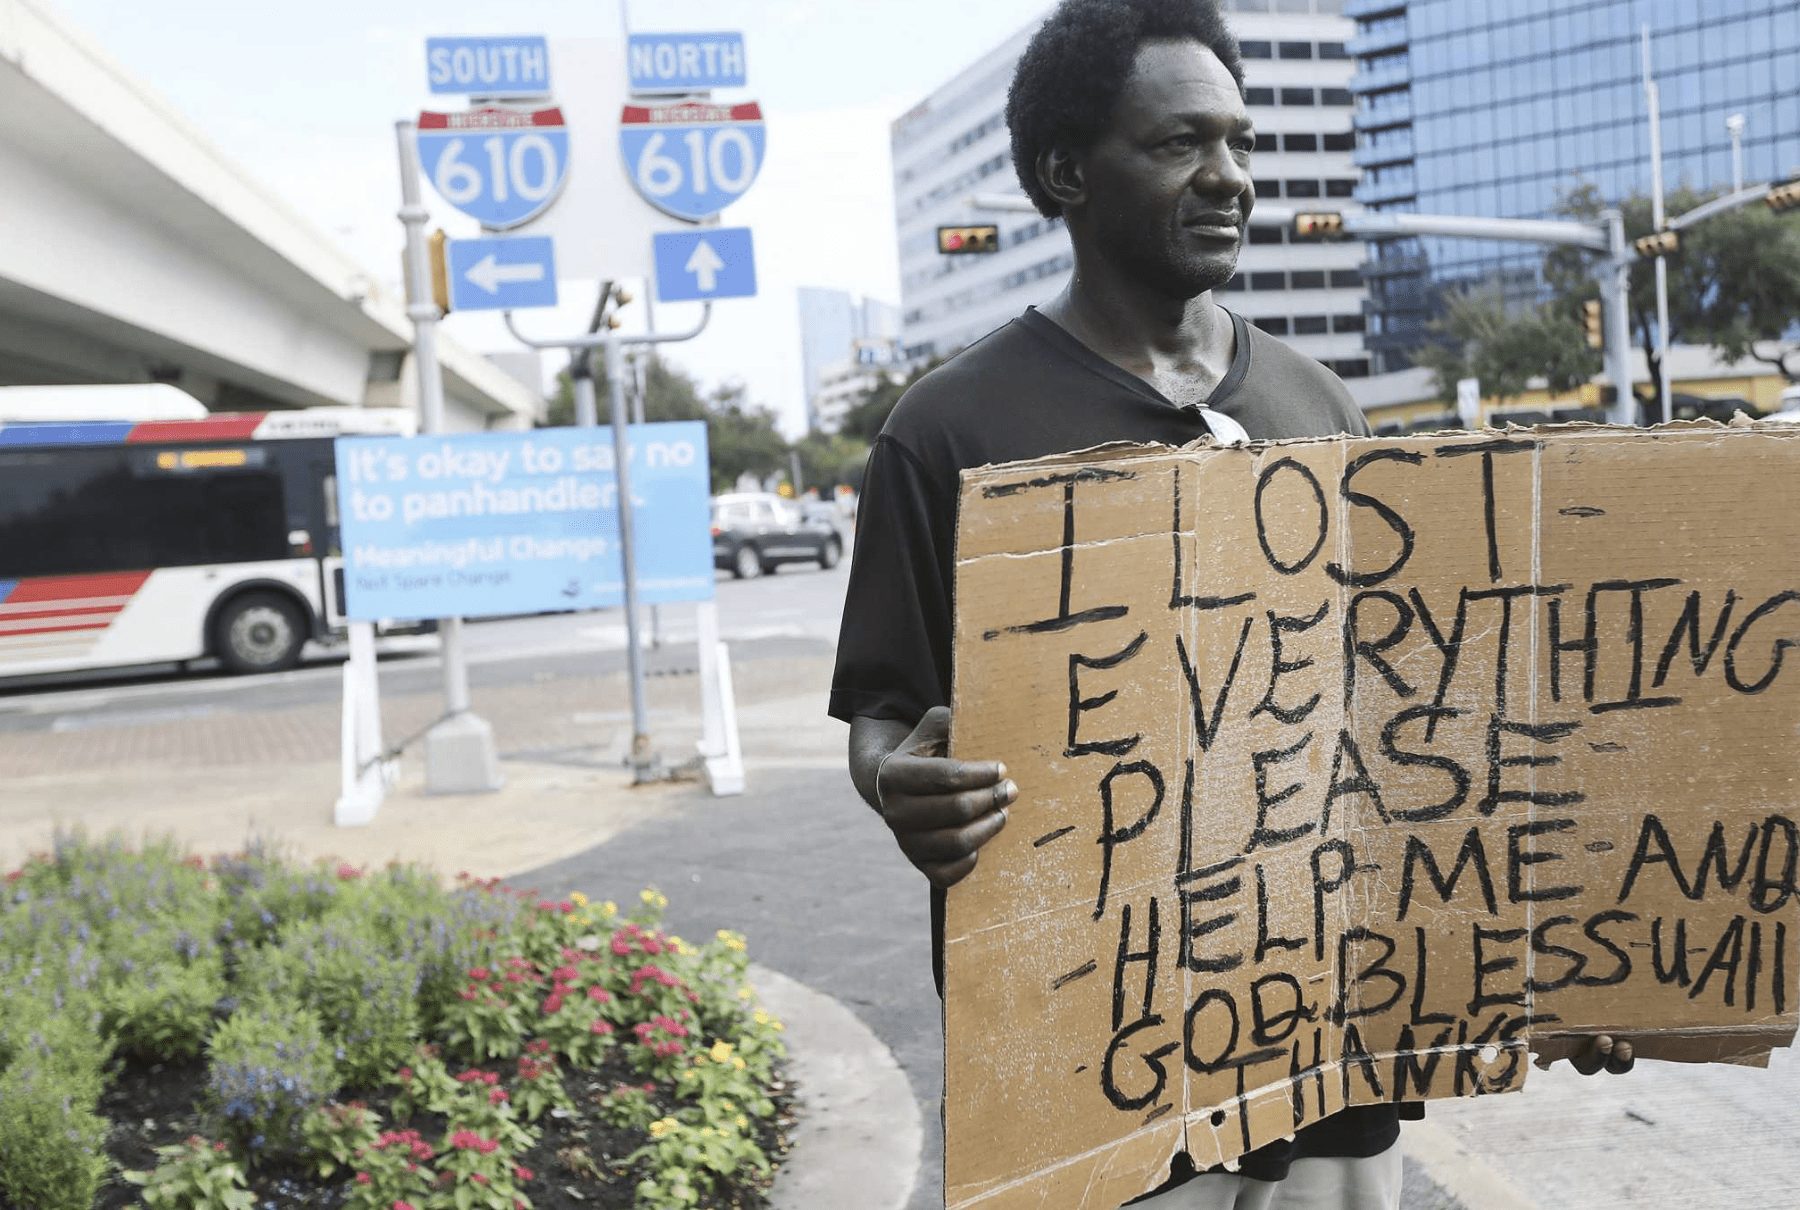 Dallas Panhandling Initiative Fails to Help Majority of Homeless & Vagrants